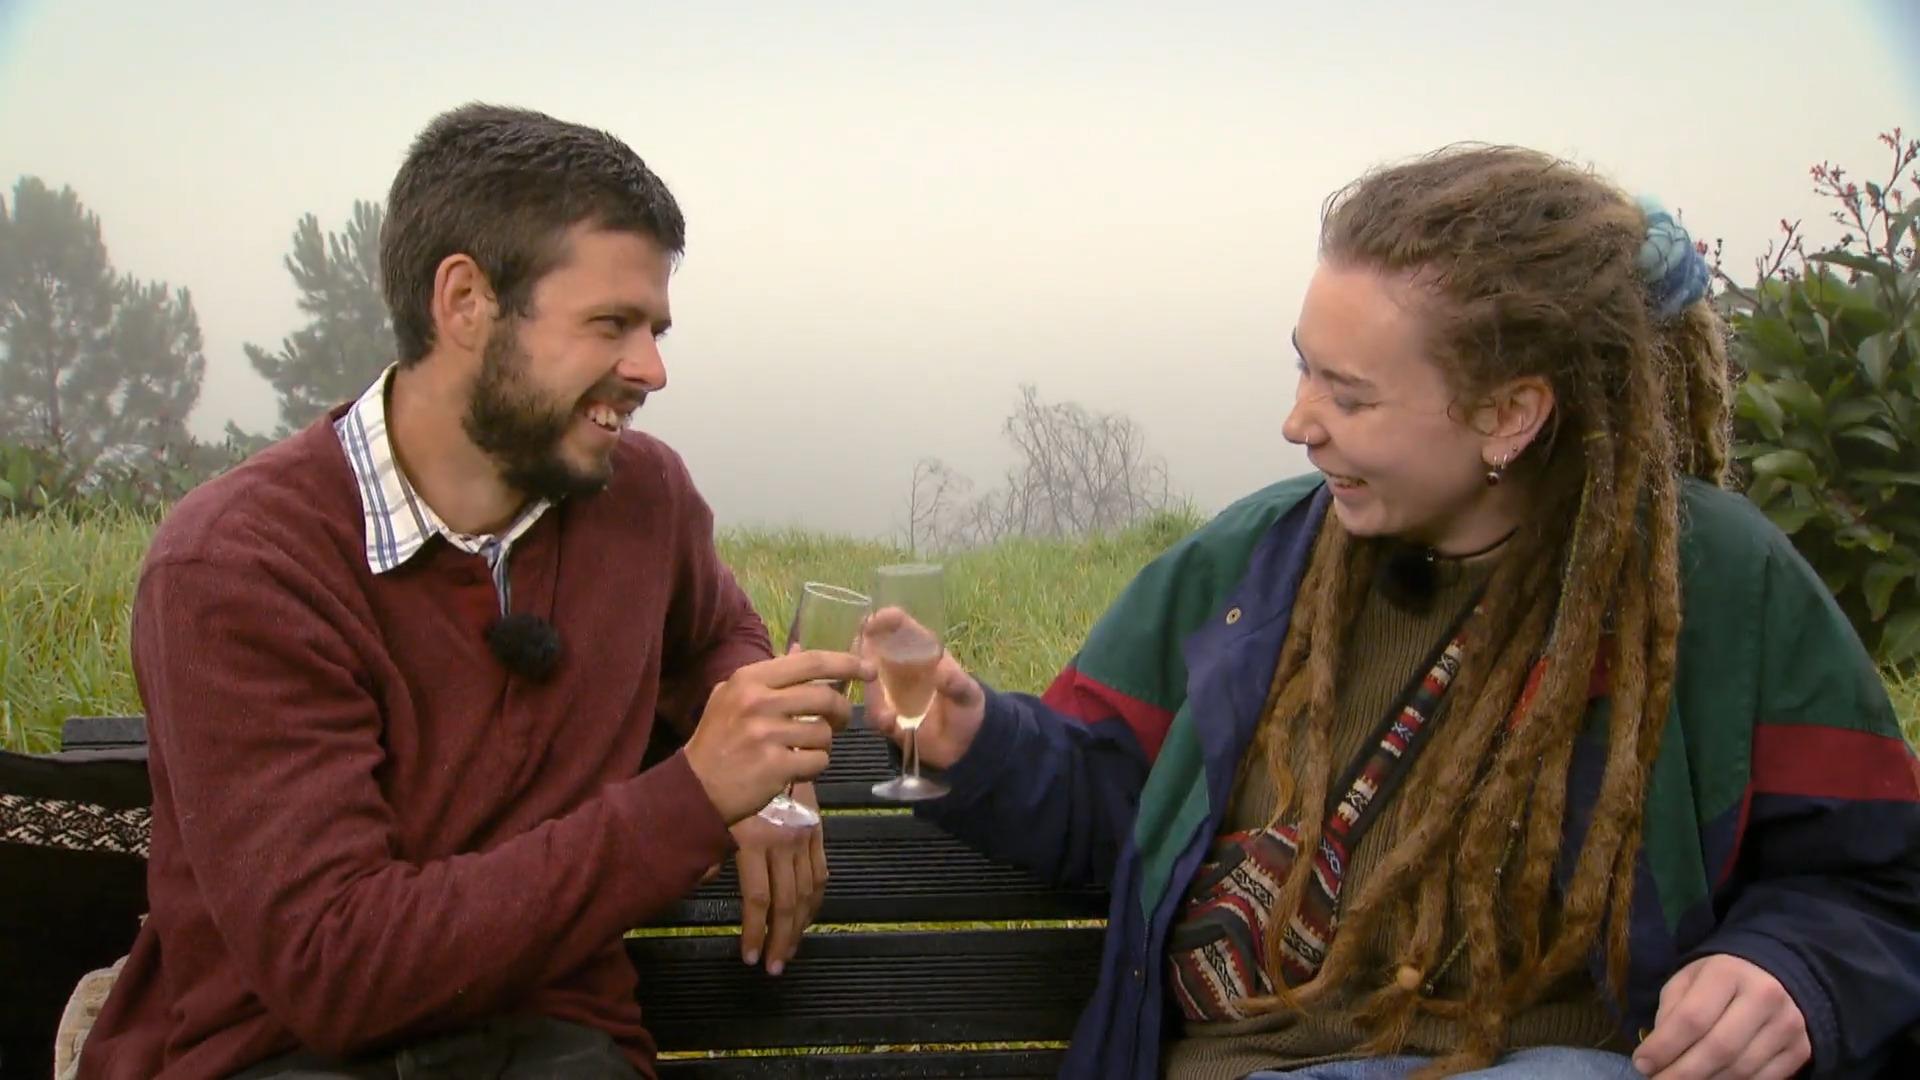 Farmer Werner: "He could be the one for me" Leonie wants to go back